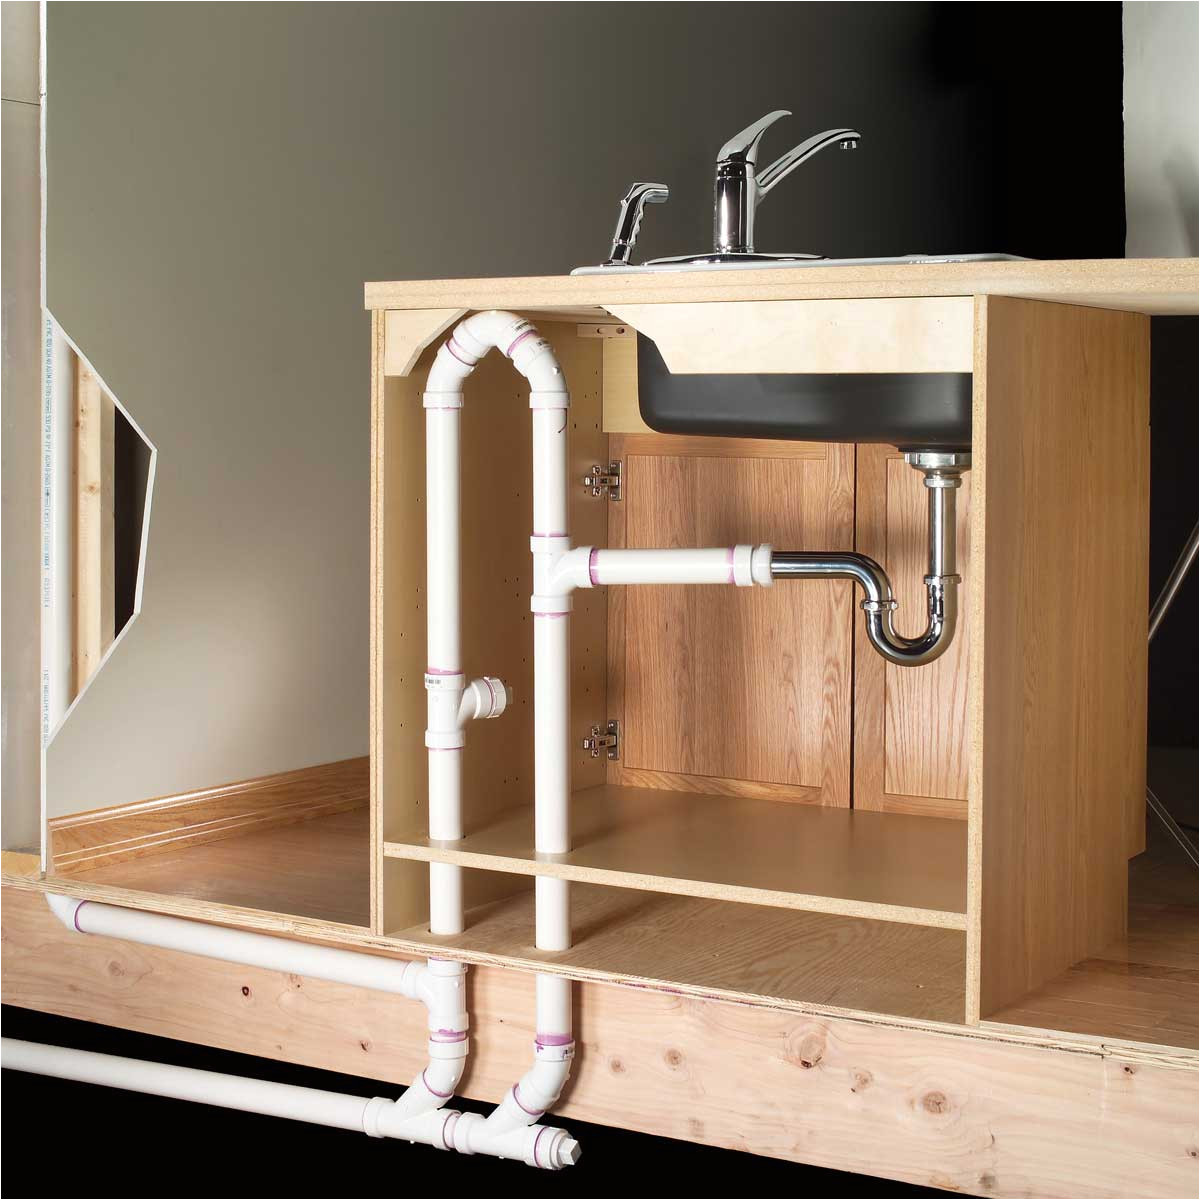 Stand Alone Kitchen Sink Units How to Plumb An island Sink the Family Handyman